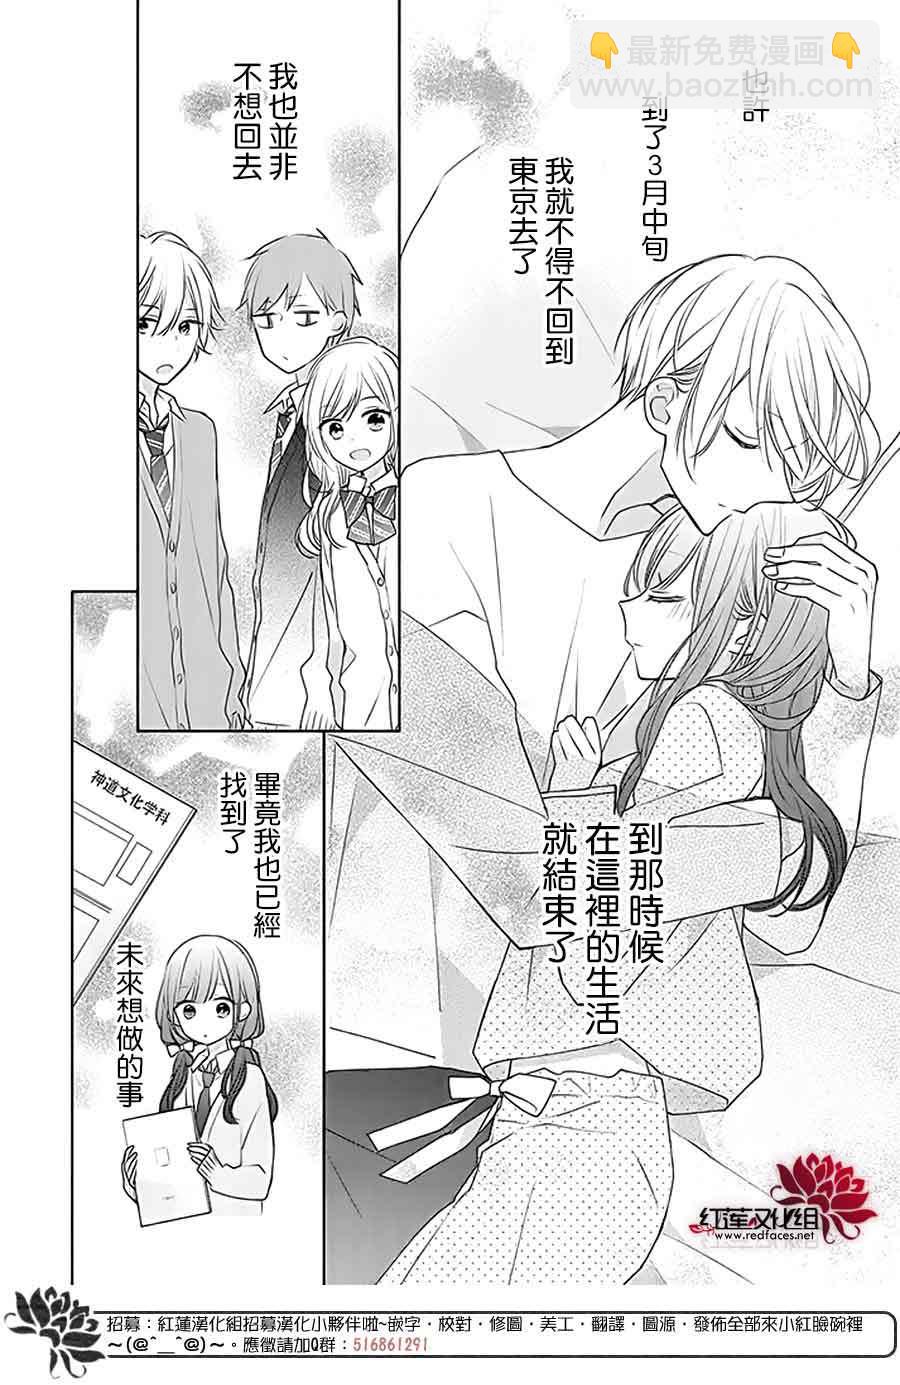 If given a second chance - 26話 - 2